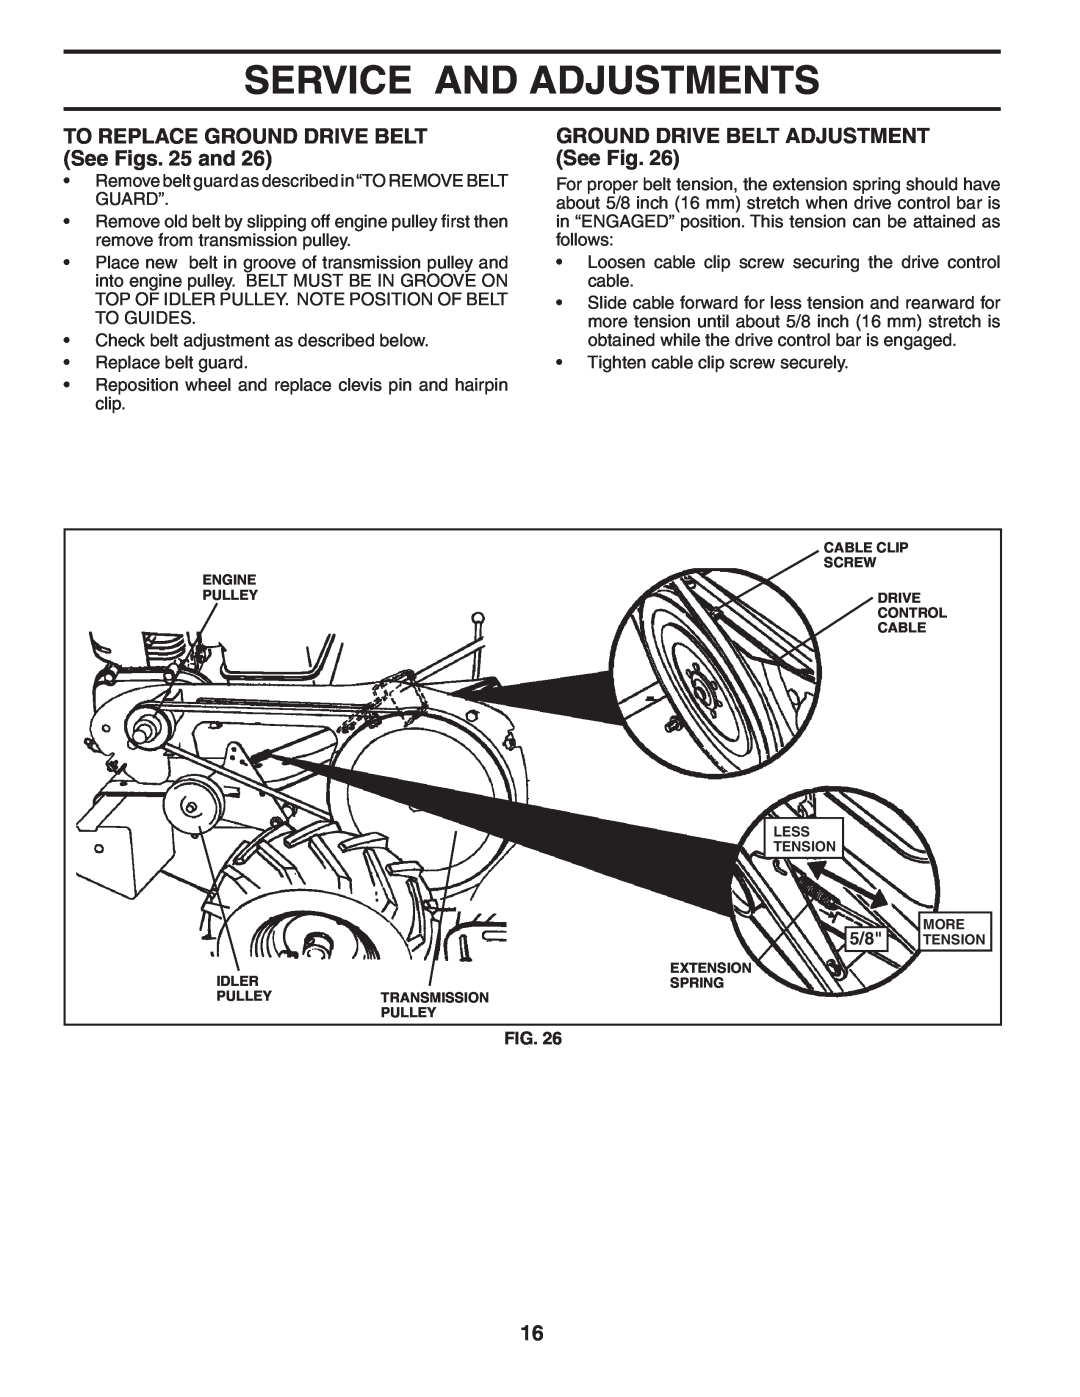 Poulan 401423 TO REPLACE GROUND DRIVE BELT See Figs. 25 and, GROUND DRIVE BELT ADJUSTMENT See Fig, Service And Adjustments 